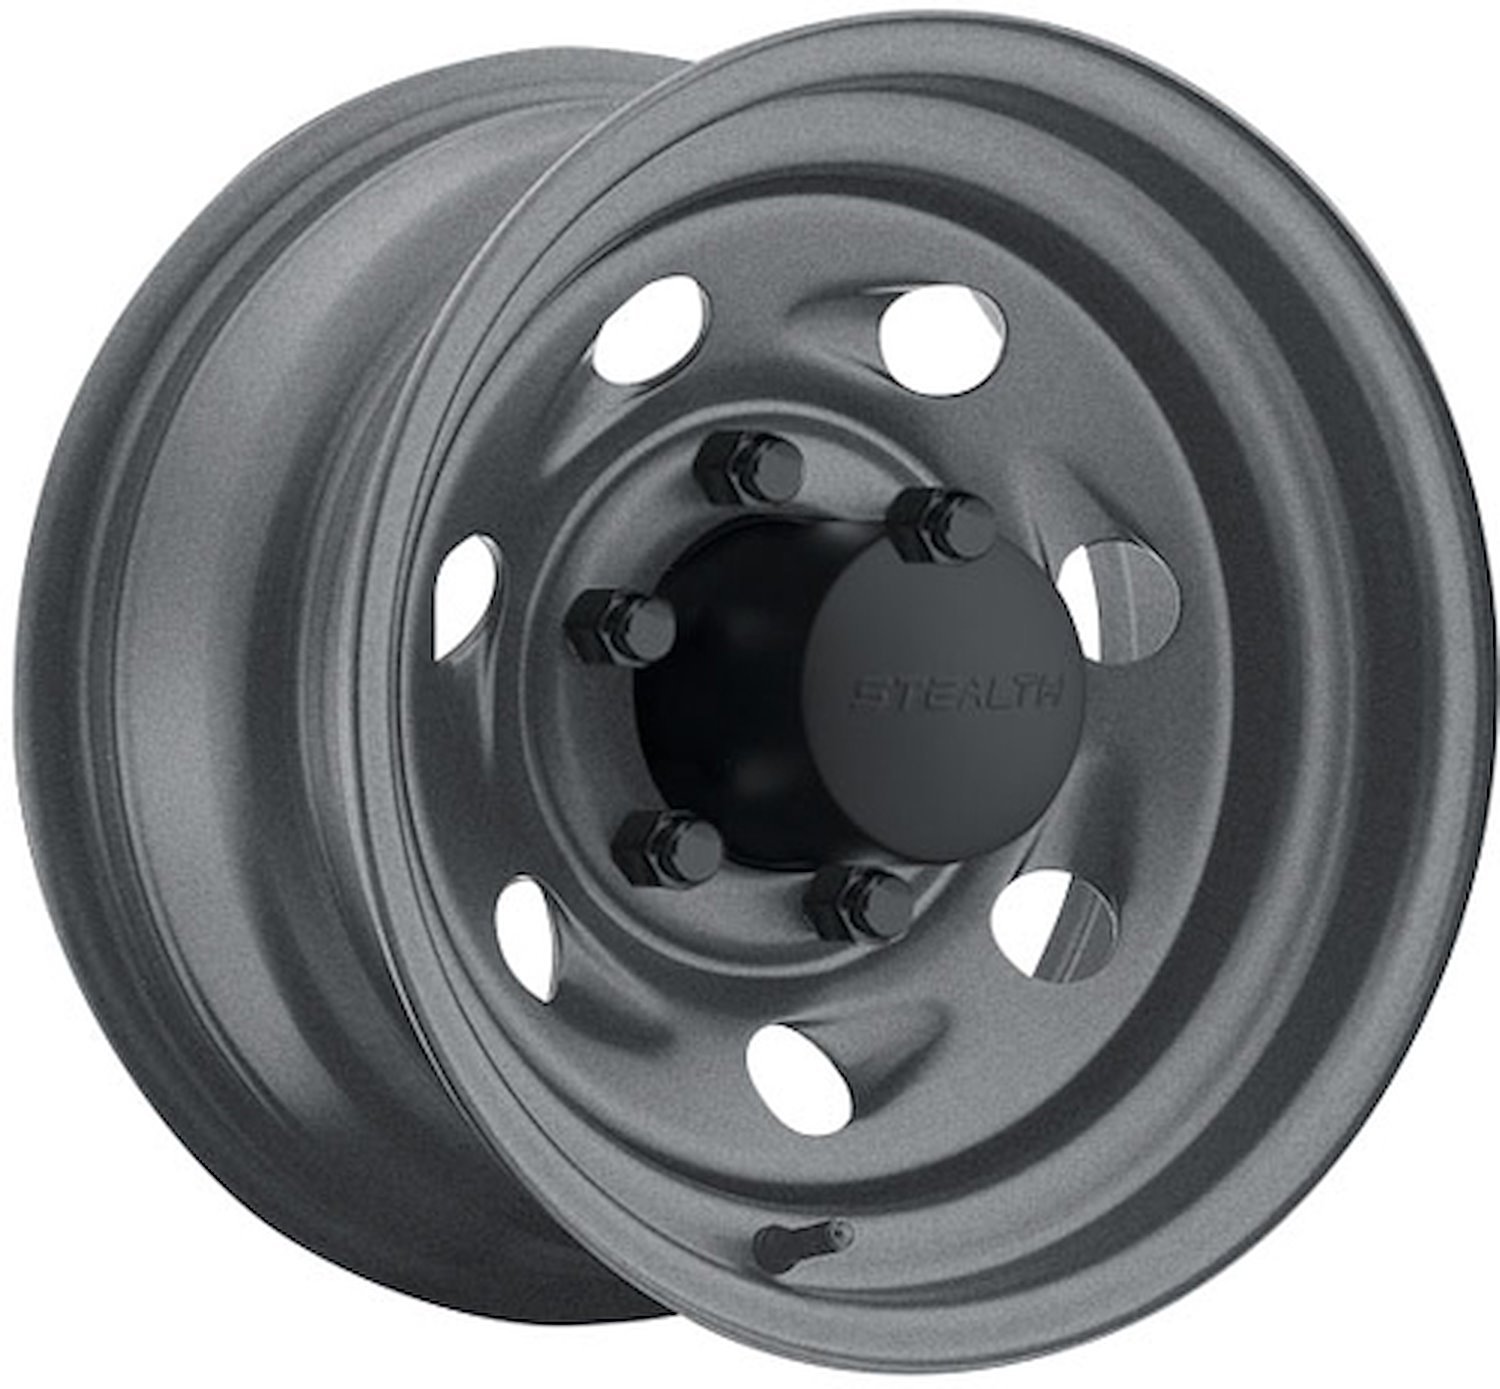 STEALTH GUNMETAL VORTEC 15 x 8 6 x 55 Bolt Circle 4 Back Spacing 13 offset 428 Center Bore 1500 lbs Load Rating